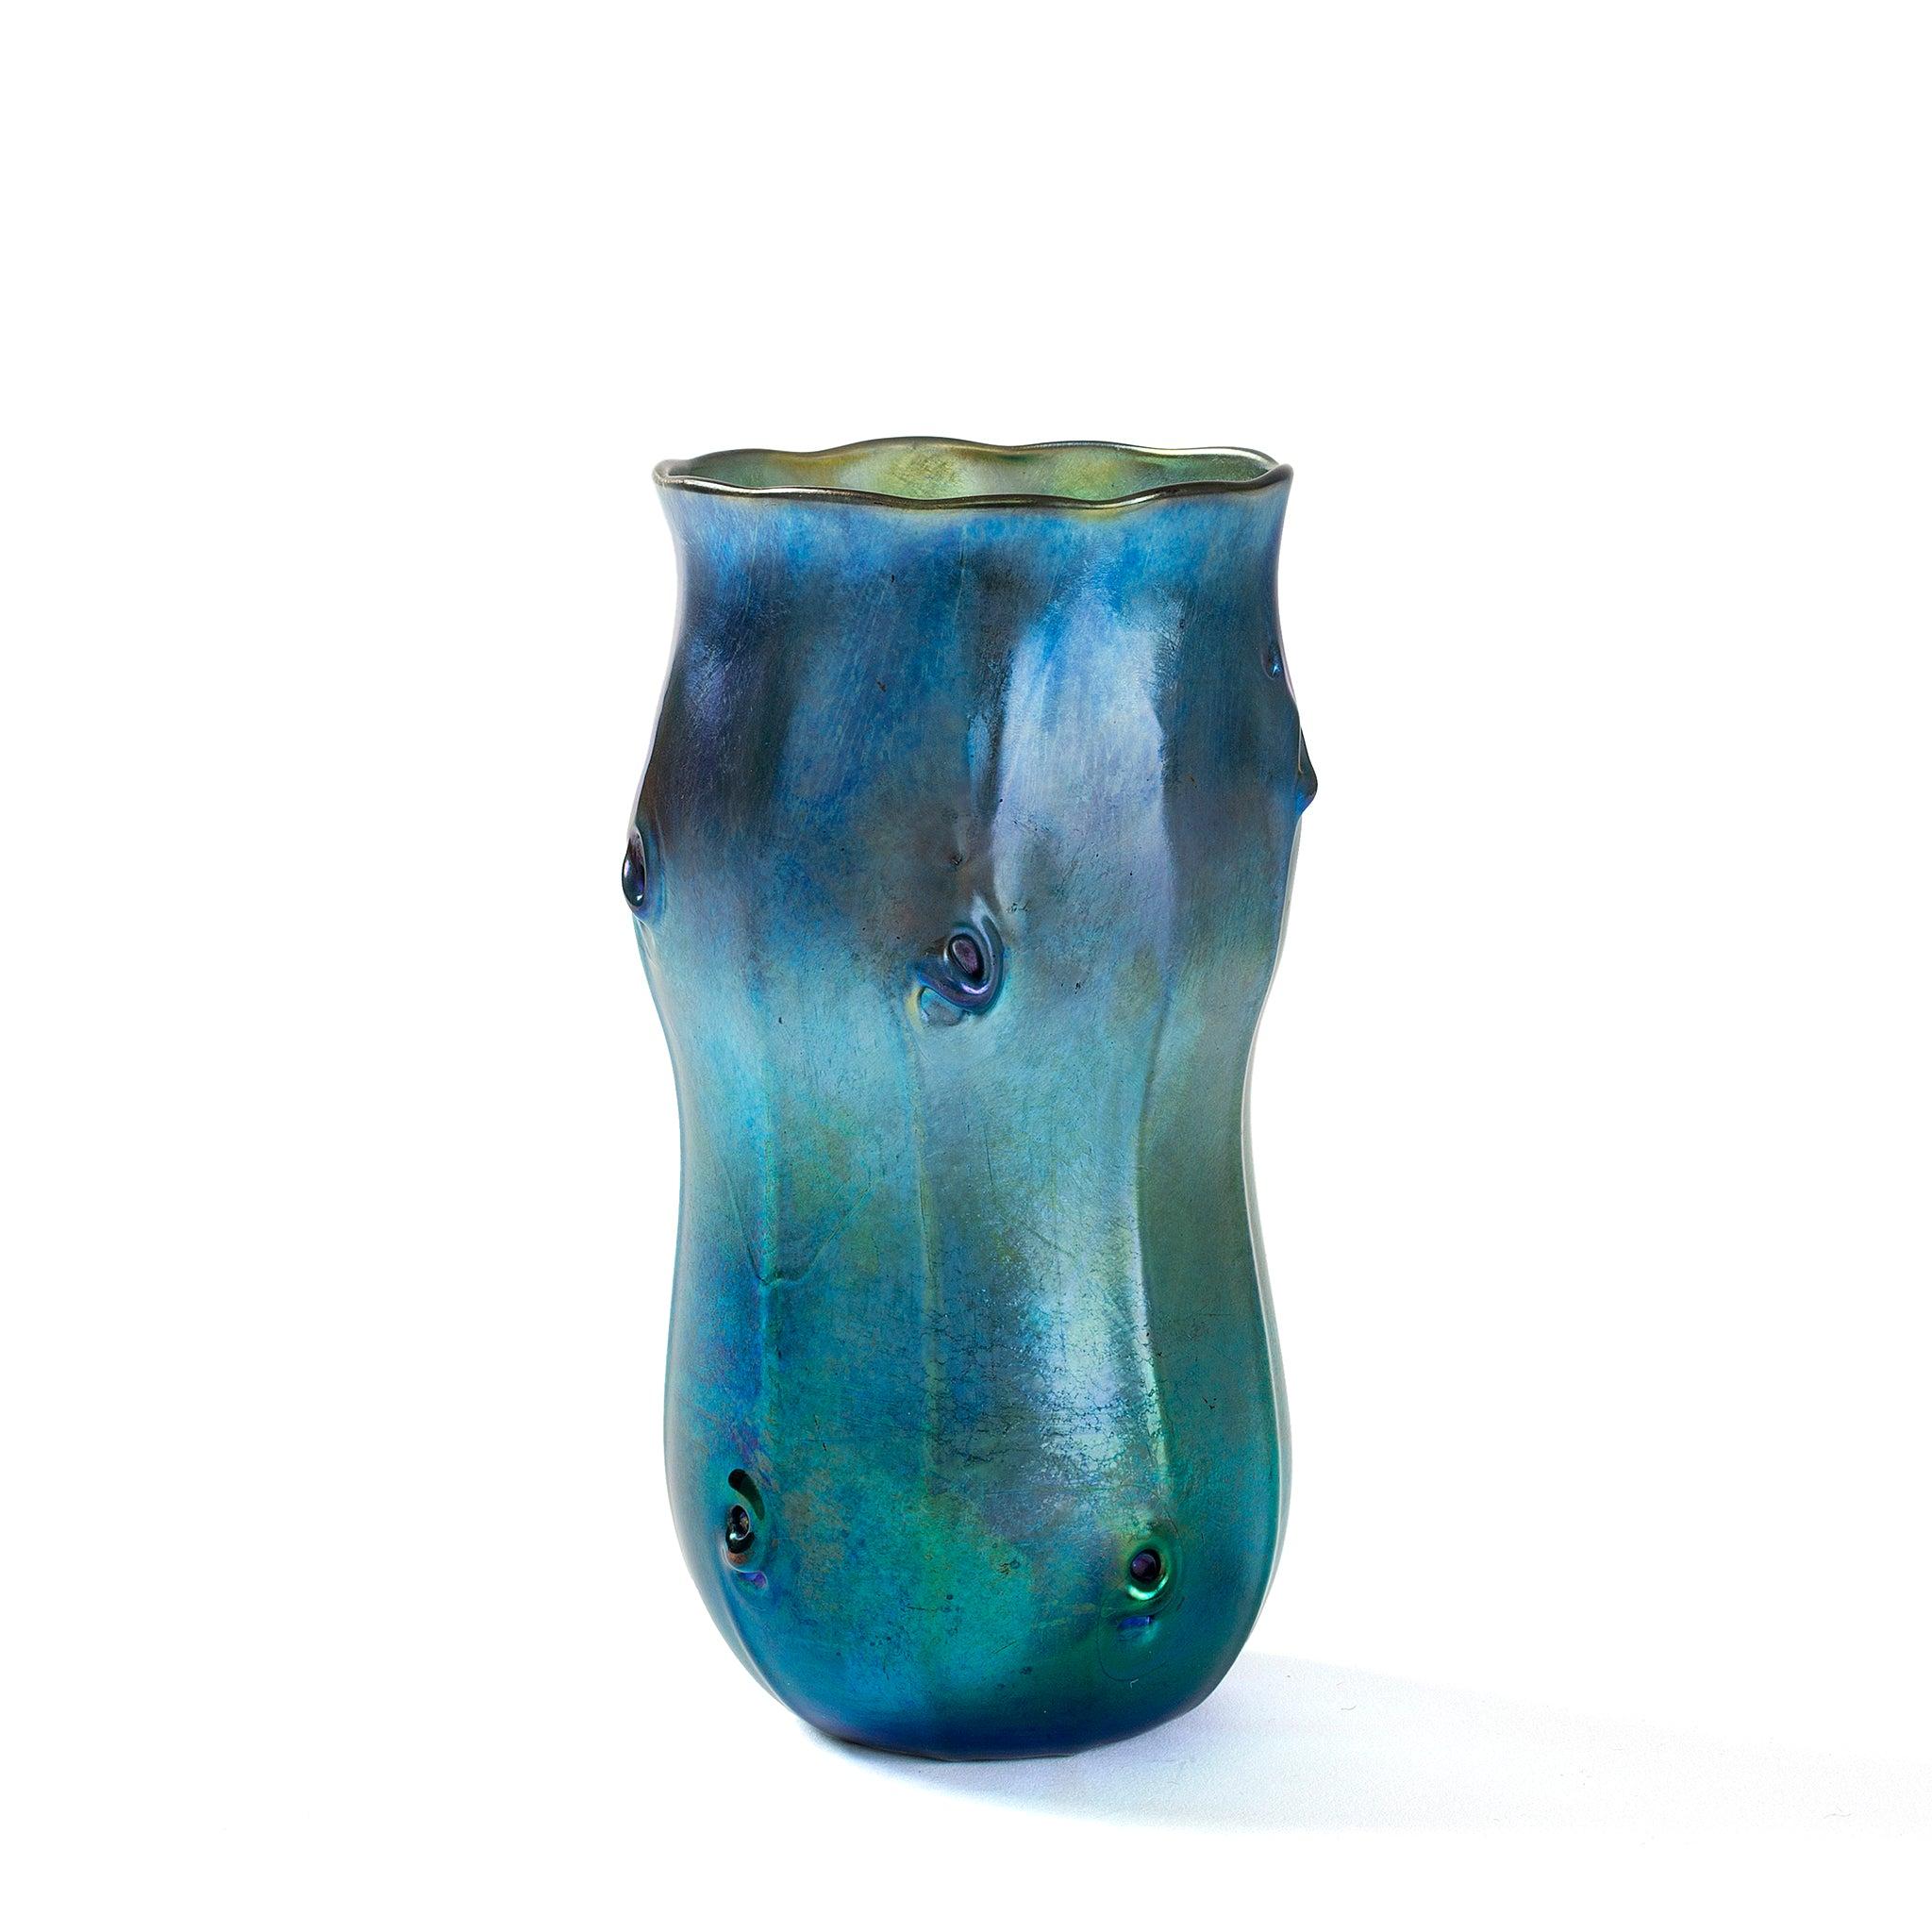 This Tiffany Studios New York blue Favrile glass vase is a stylized Art Nouveau version of the Chinese huluping or double-gourd vase. The vase is decorated with fluting and swirled pigtail prunts that recall the lapping of ocean waves, grating from